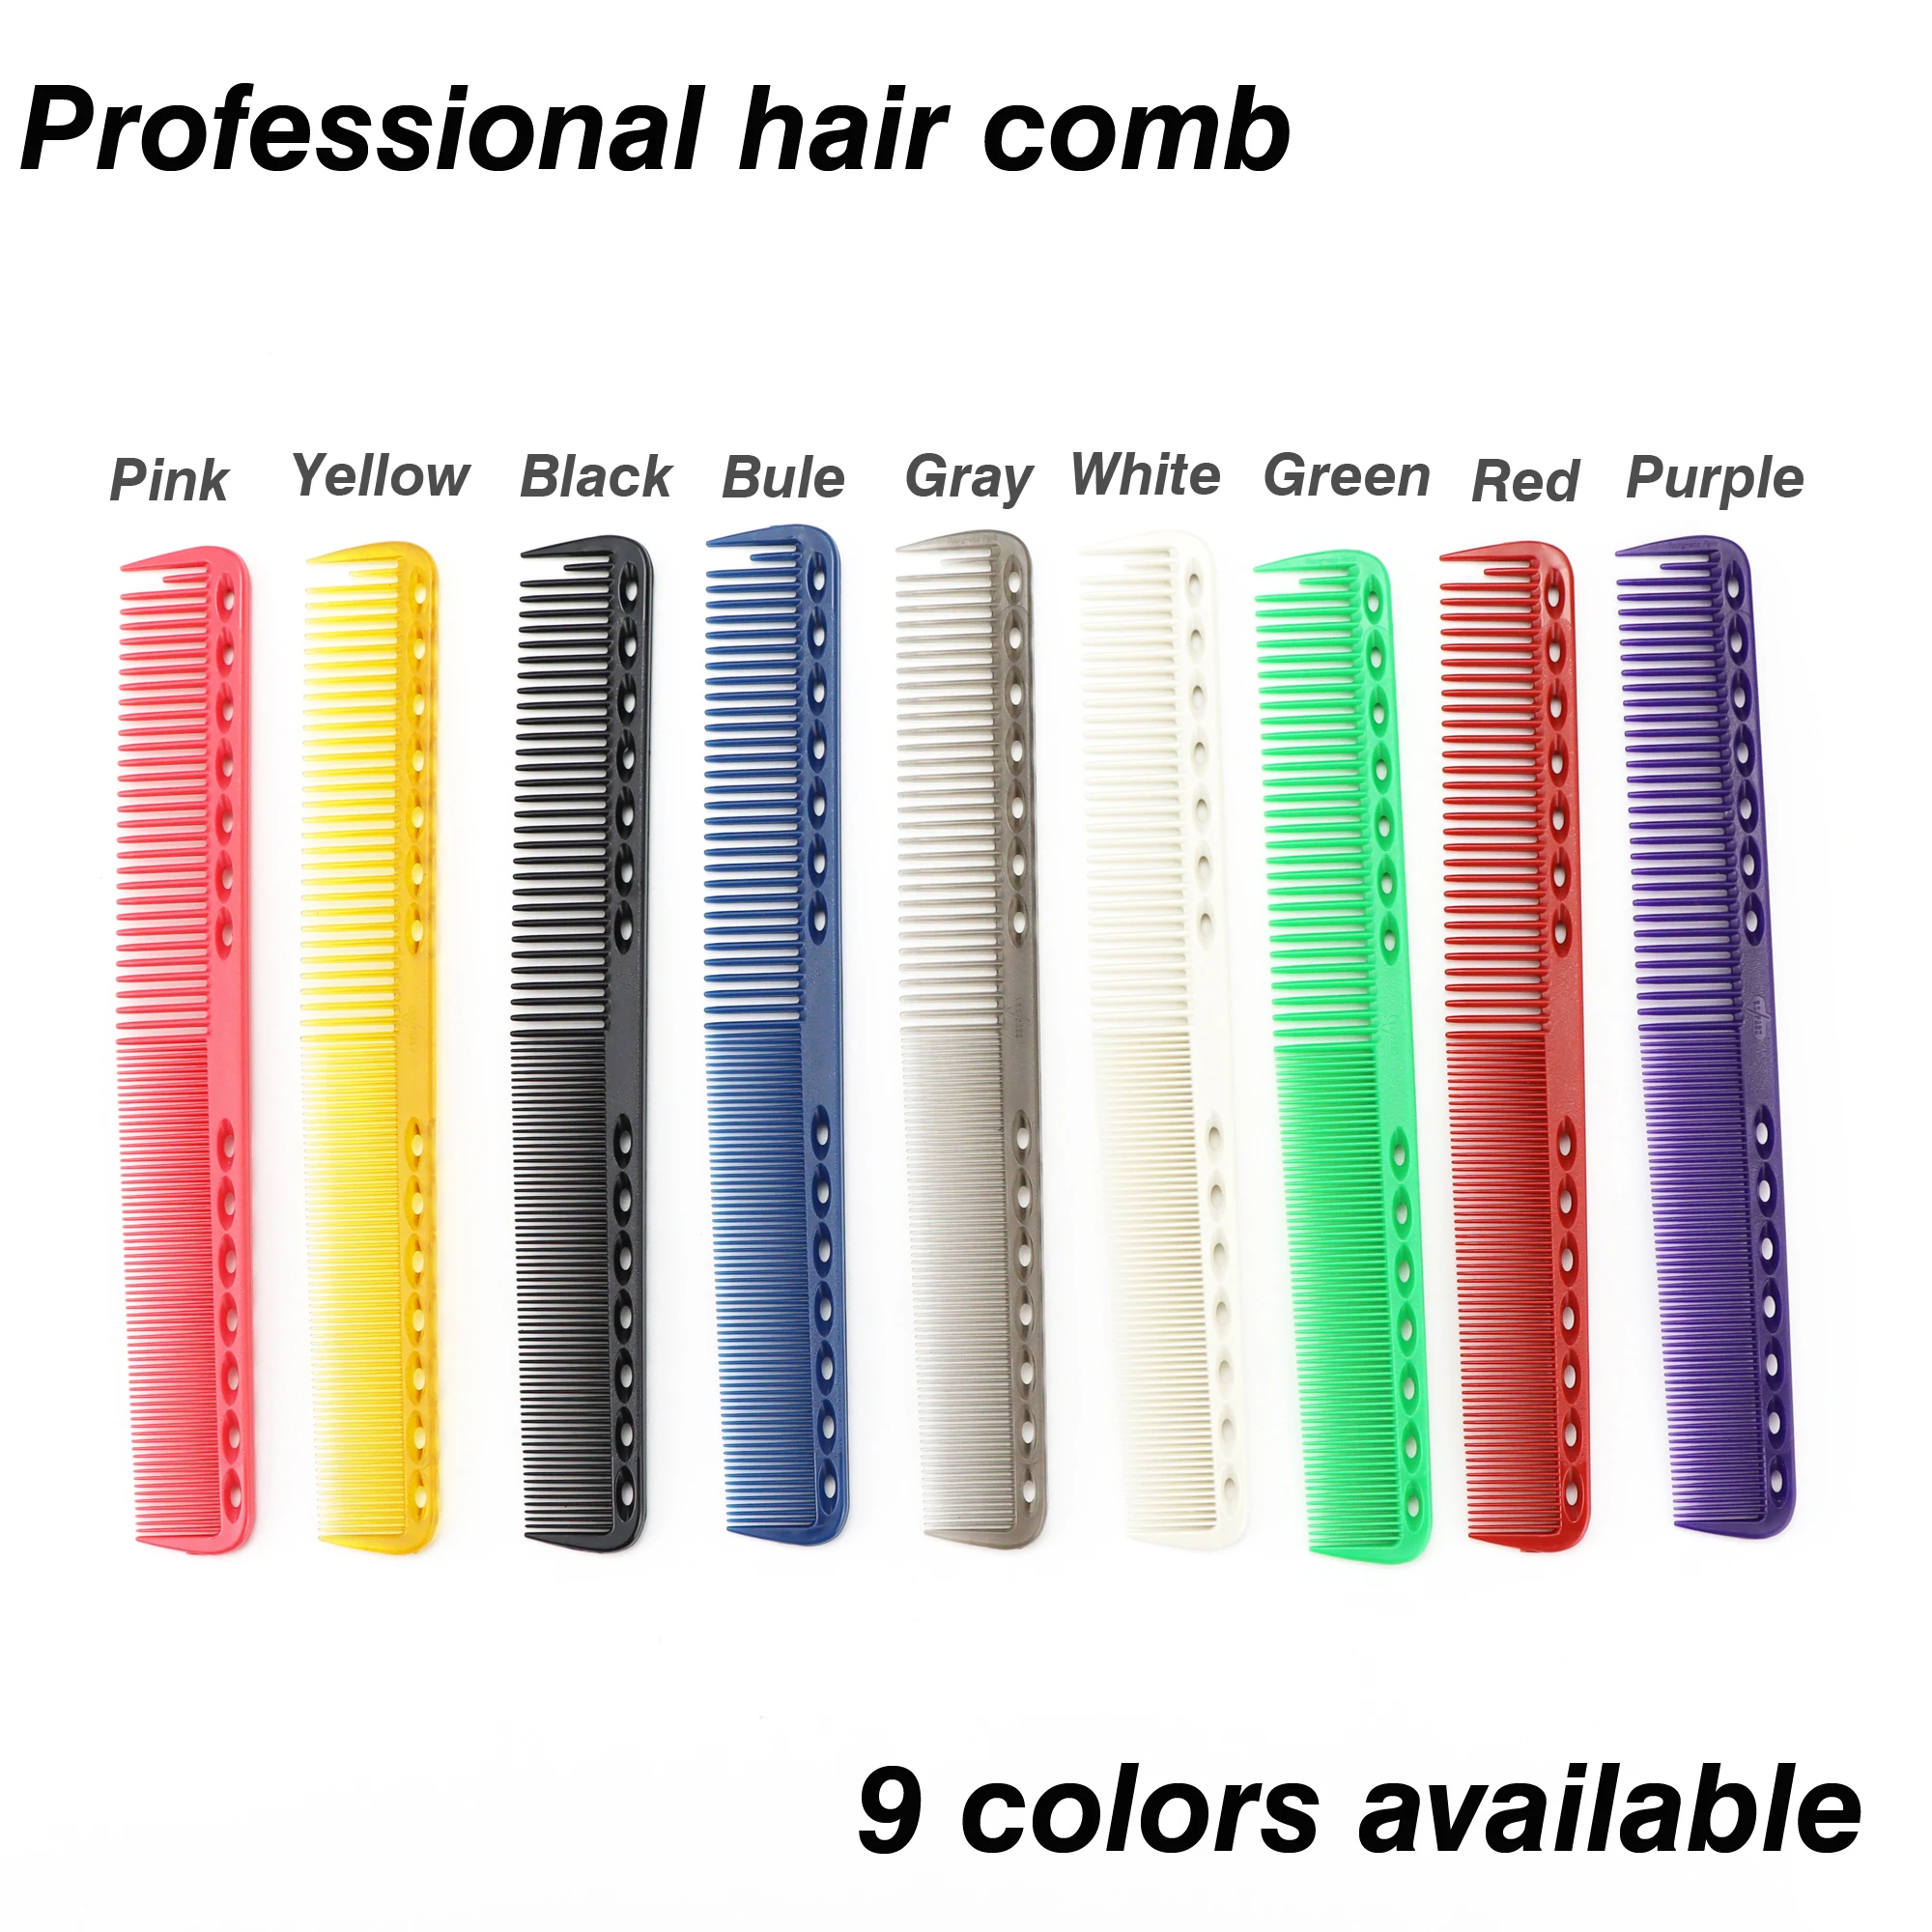 9 color professional hair comb, hairdresser, hair cutting brush, anti-static entanglement pro salon hair care styling tool